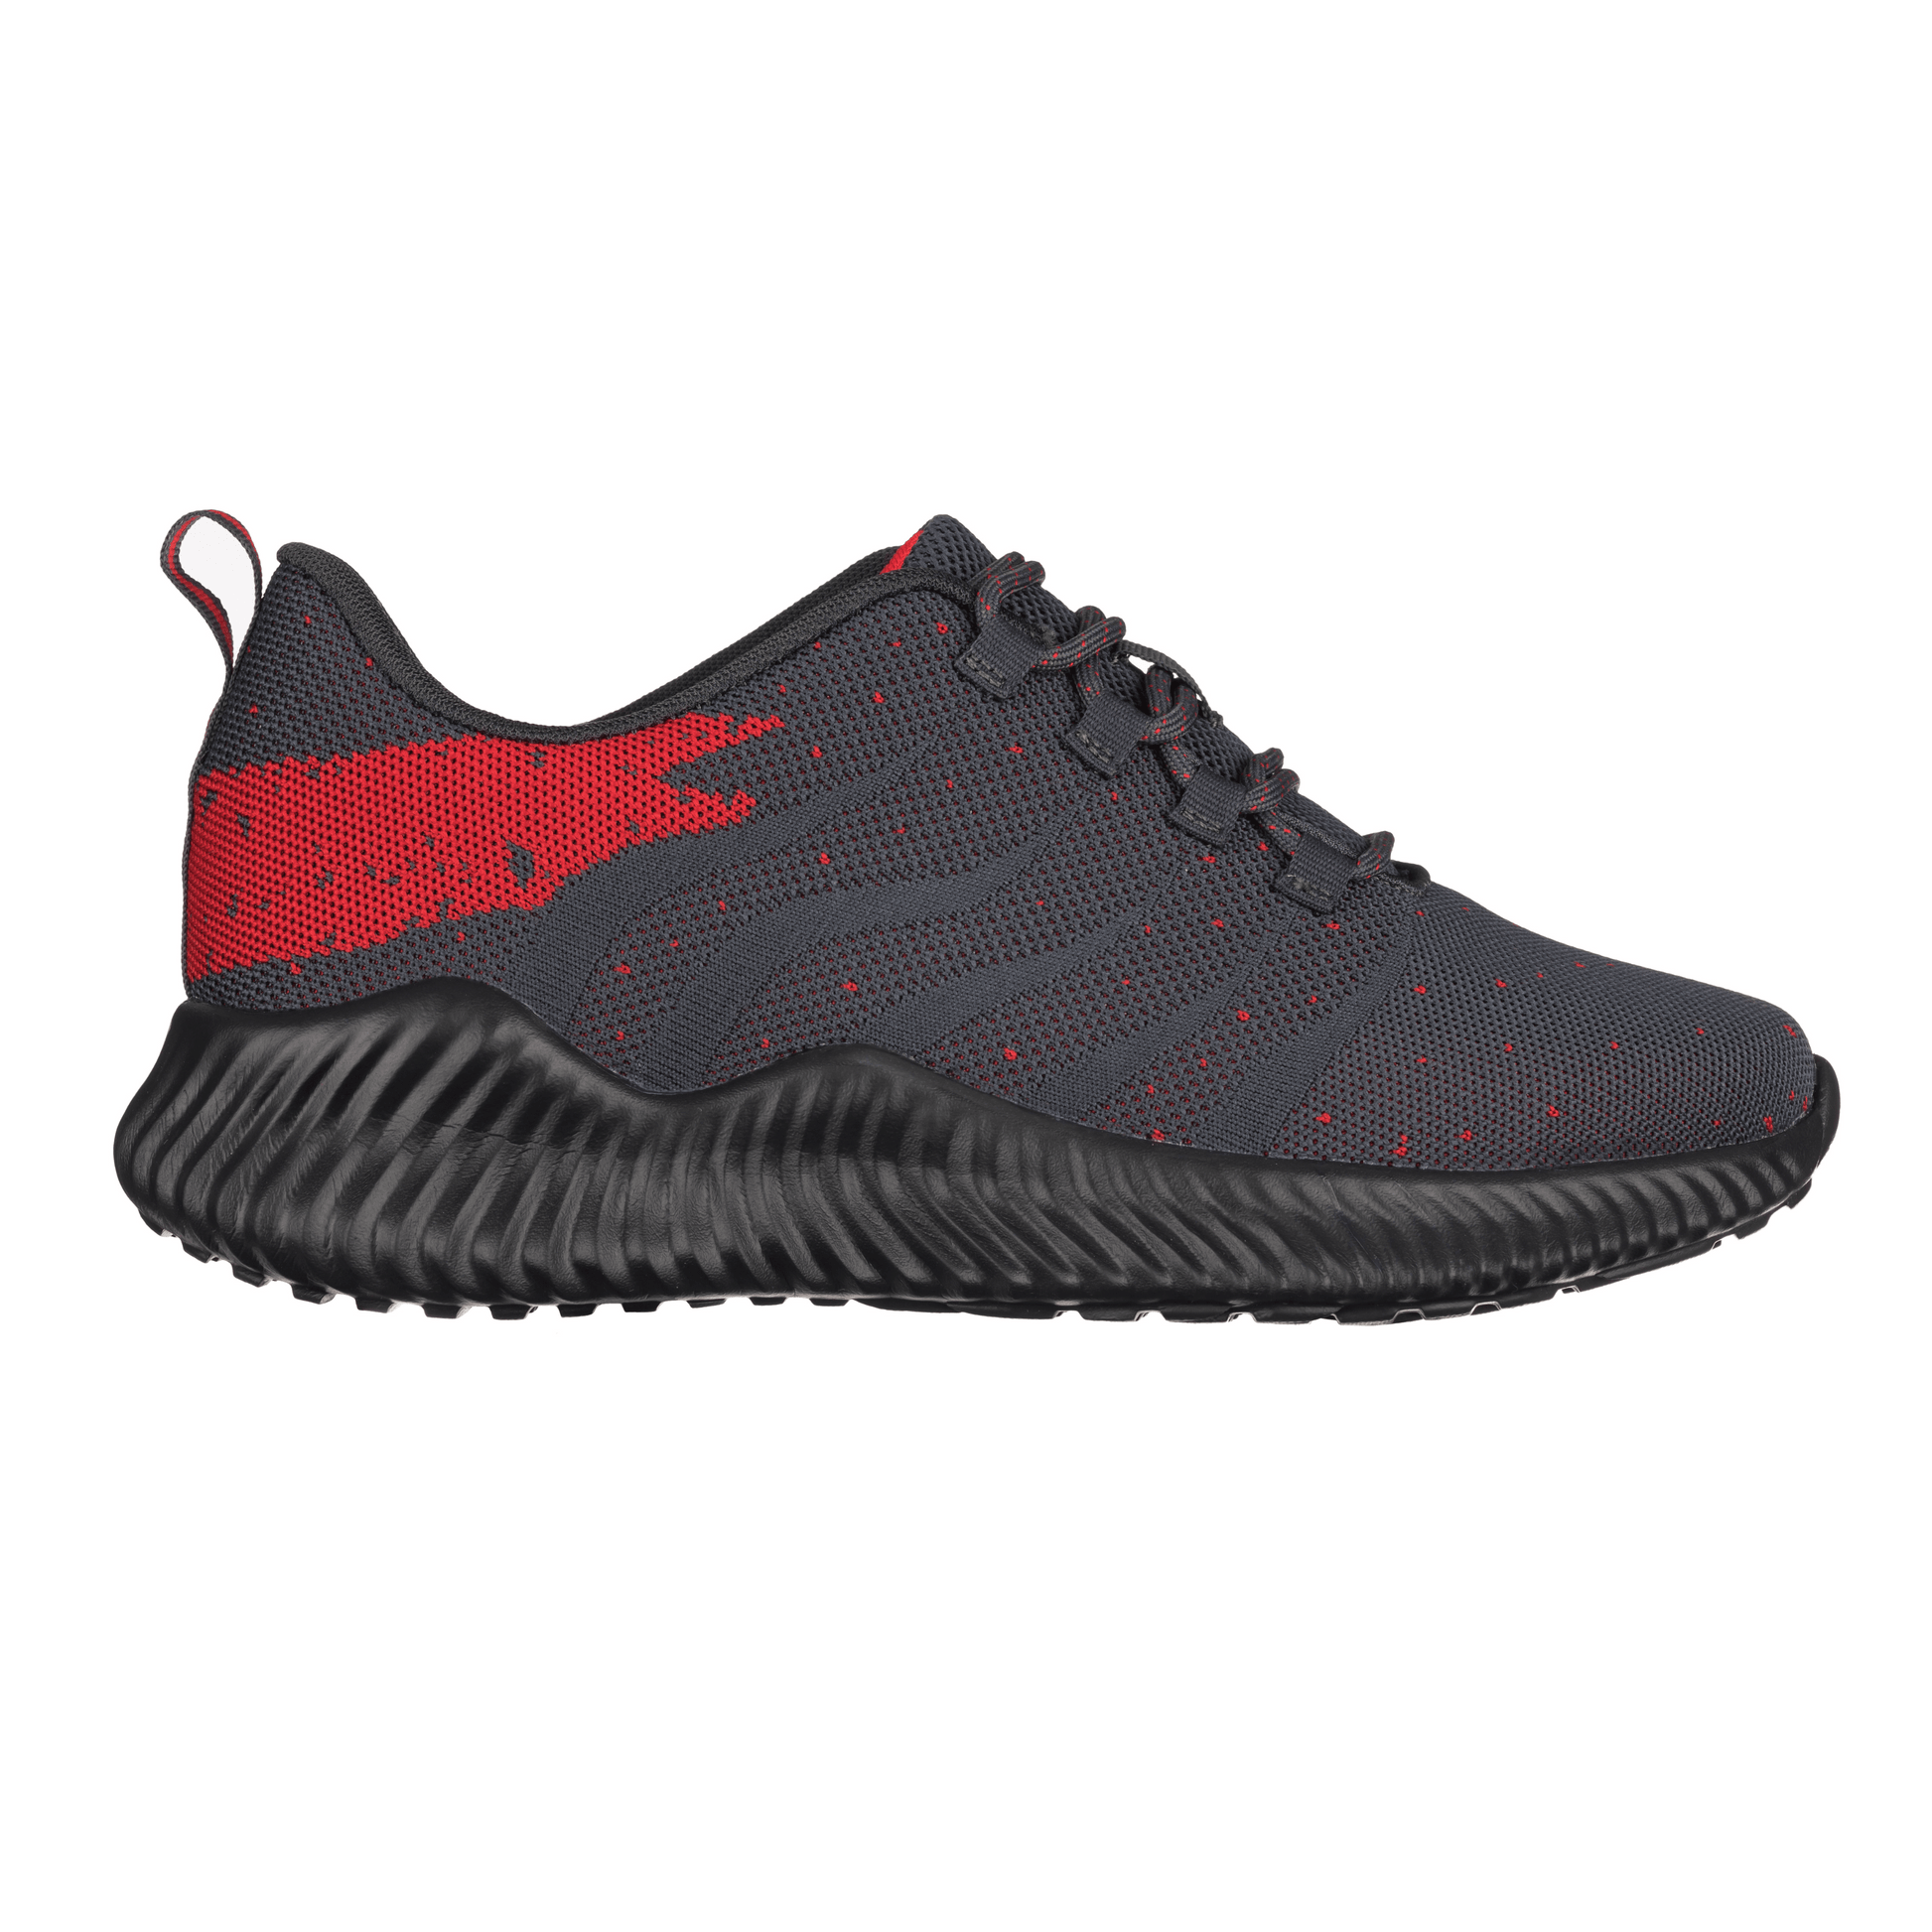 Elevator shoes height increase CALTO - Q218 - 2.8 Inches Taller (Grey/Red) - Ultra Lightweight